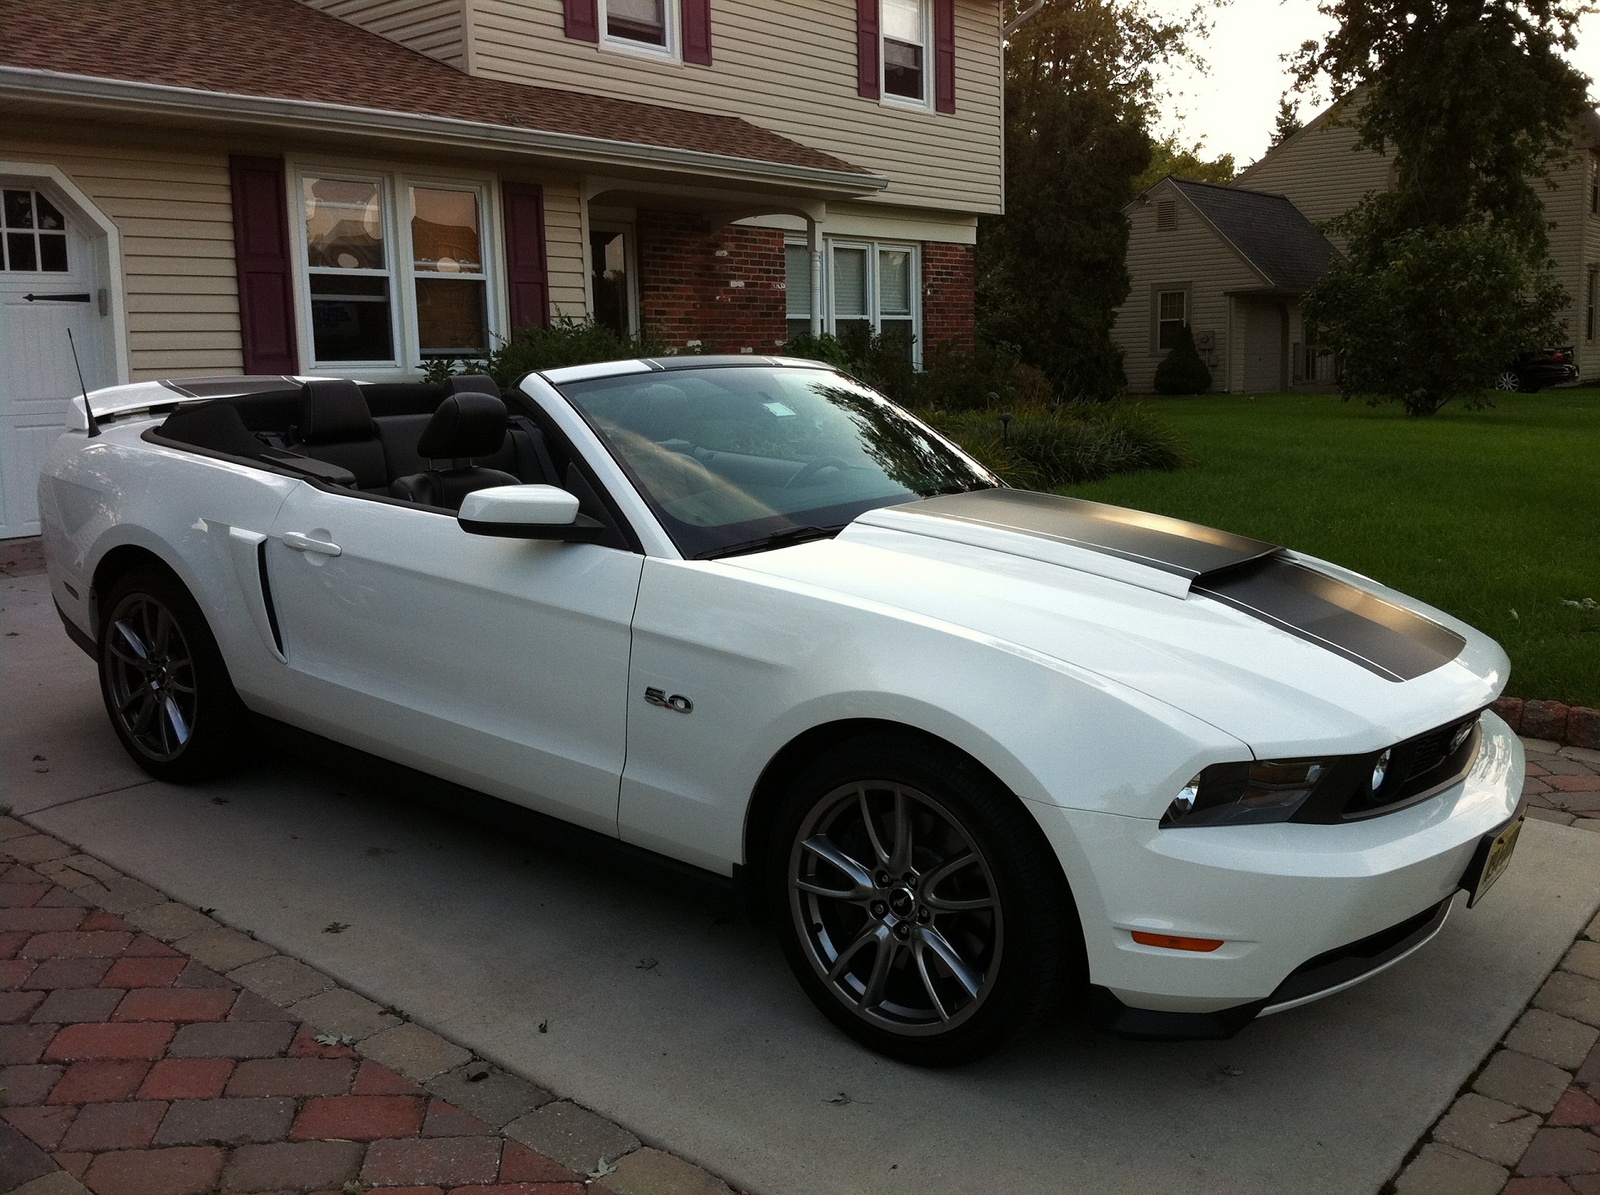 Ford mustang convertible review 2011 #2